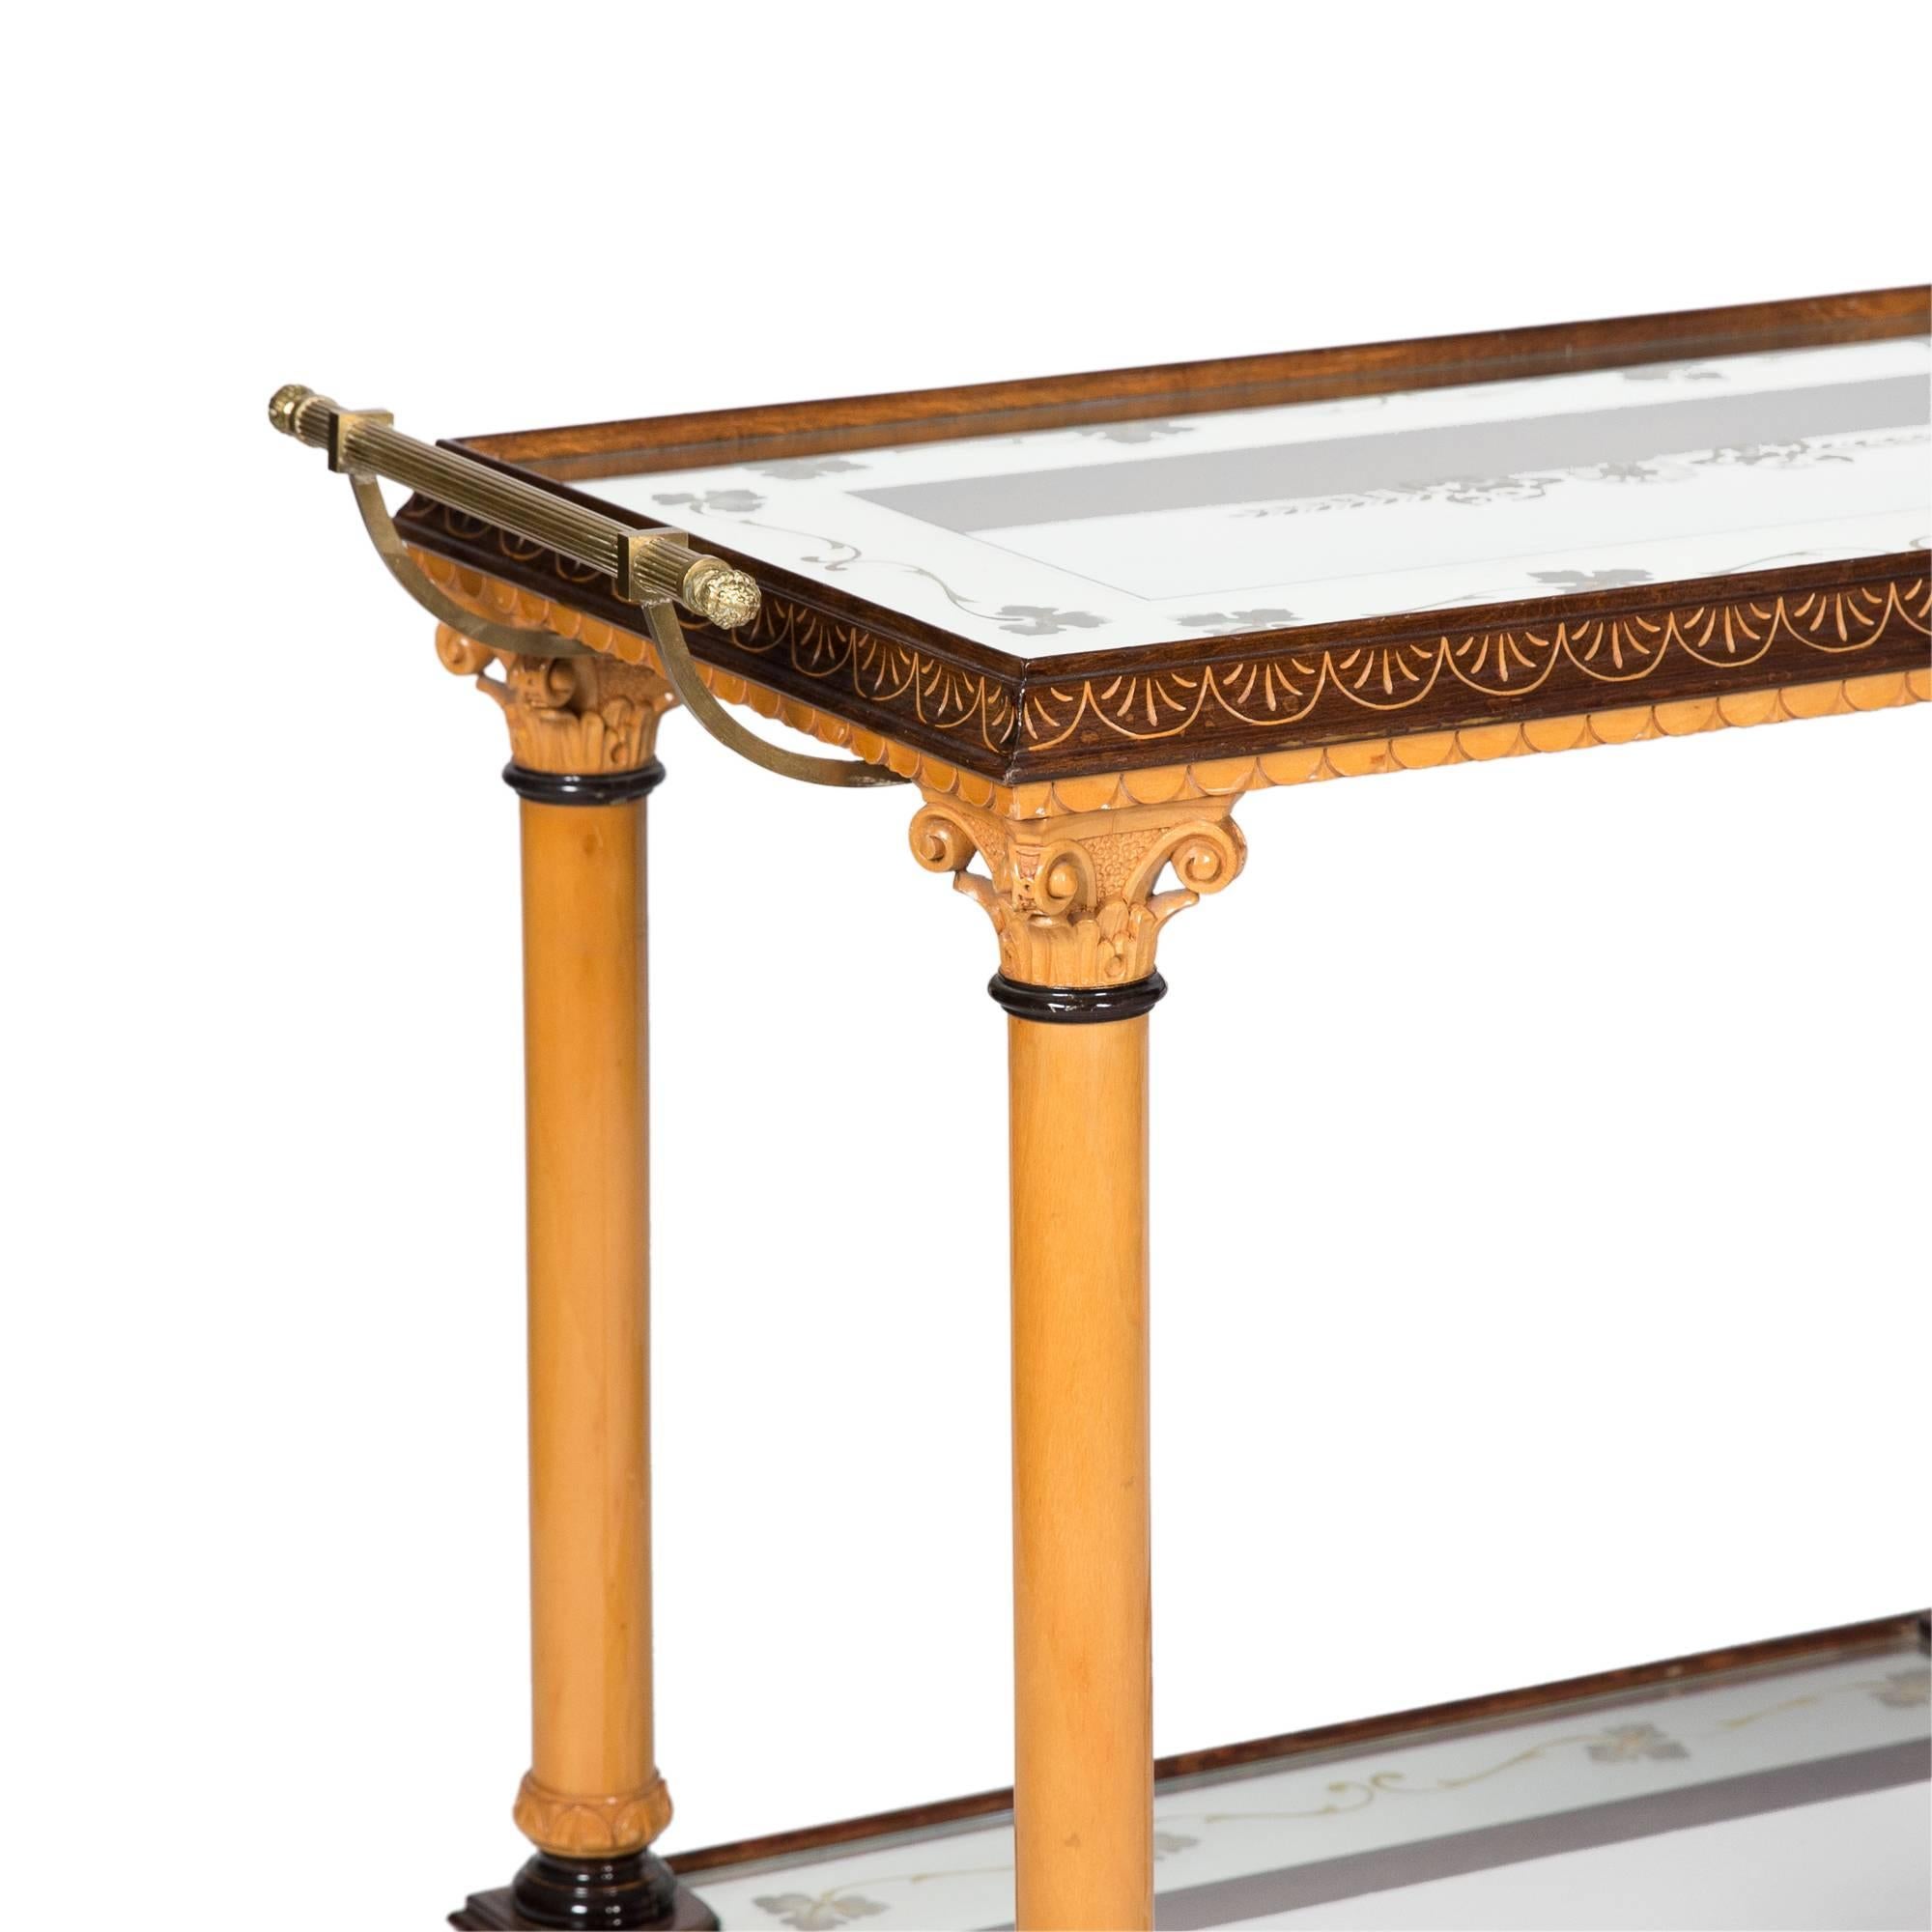 Two-tier maple serving cart, neoclassical style column legs, the surfaces glass with reverse painted mirror border, brass handles, darkened and carved edgework, United States 1980s. Measures: Height 30 1/2 in, width 34 1/2 in, depth 17 1/2 in.